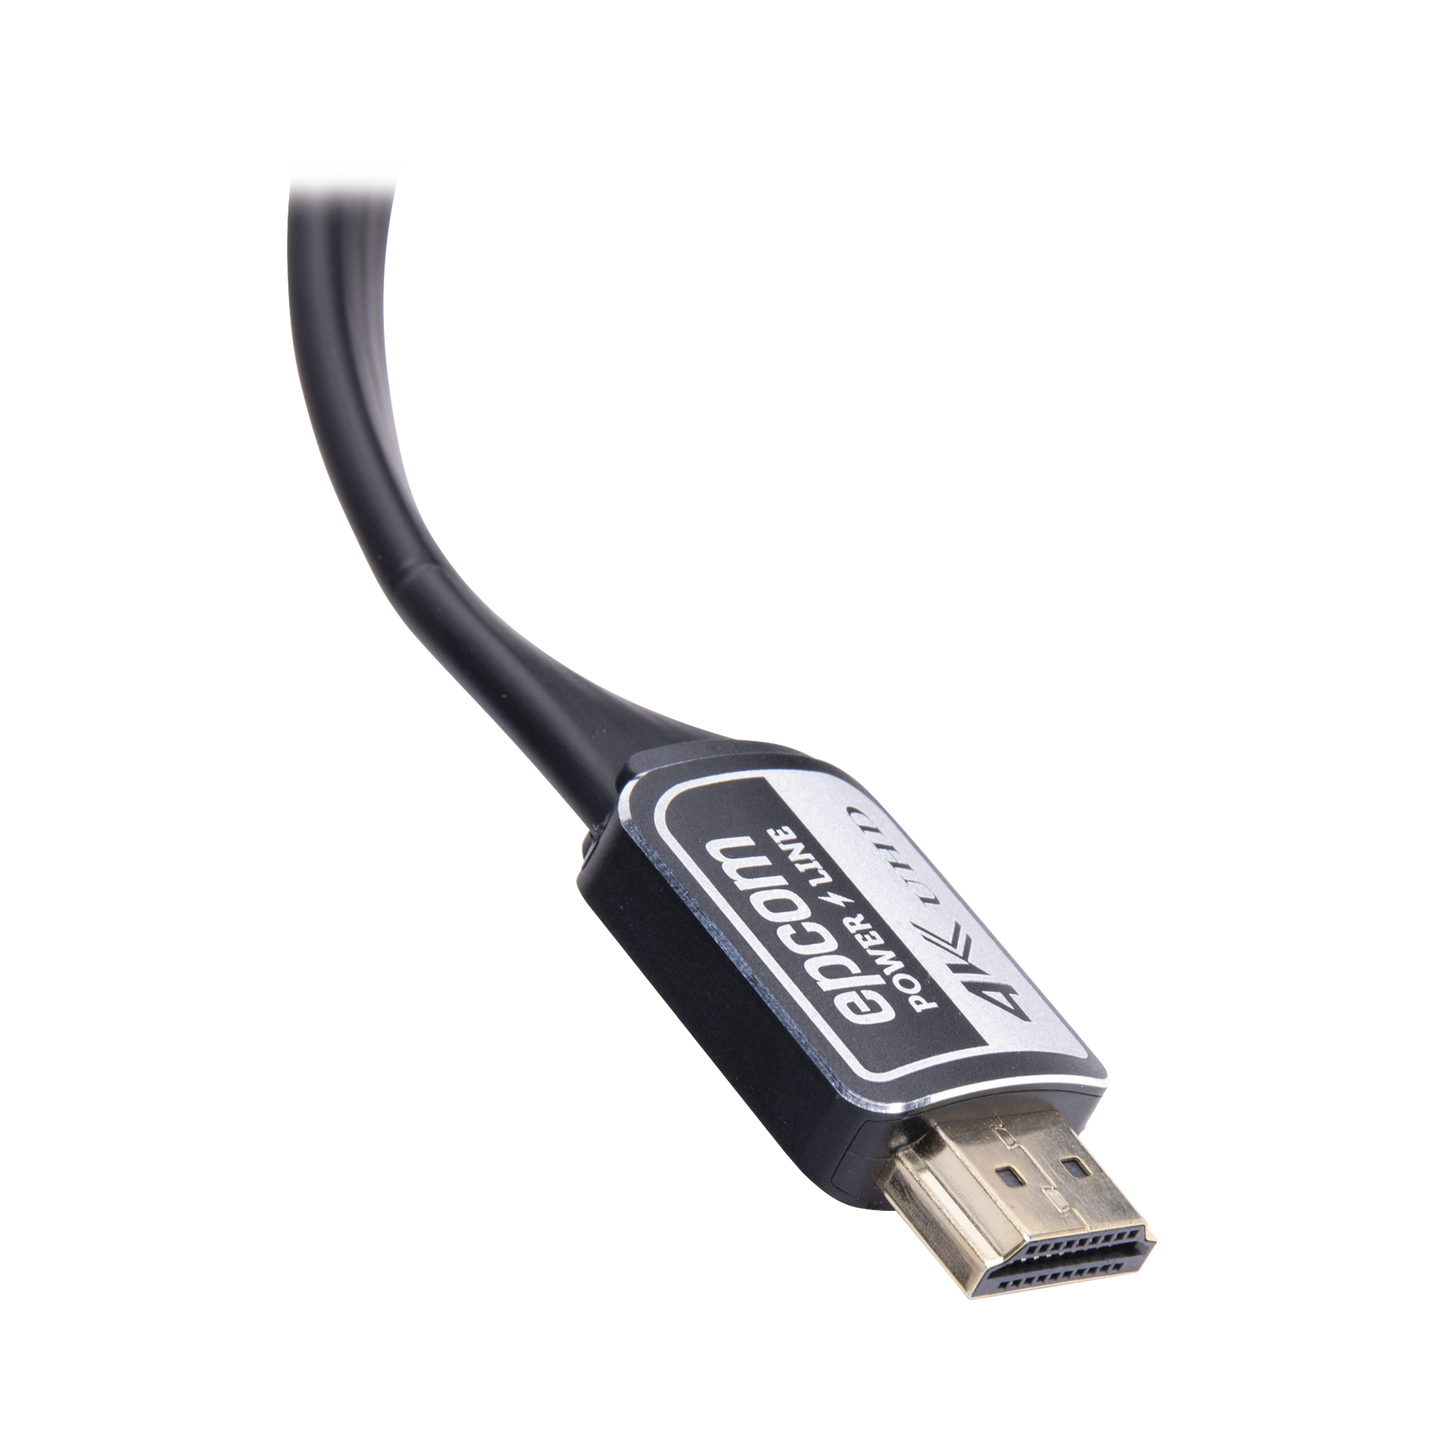 HDMI Cable 2.0 Flat Version 5m ( 16.4 ft ) Optimized for 4K ULTRA HD